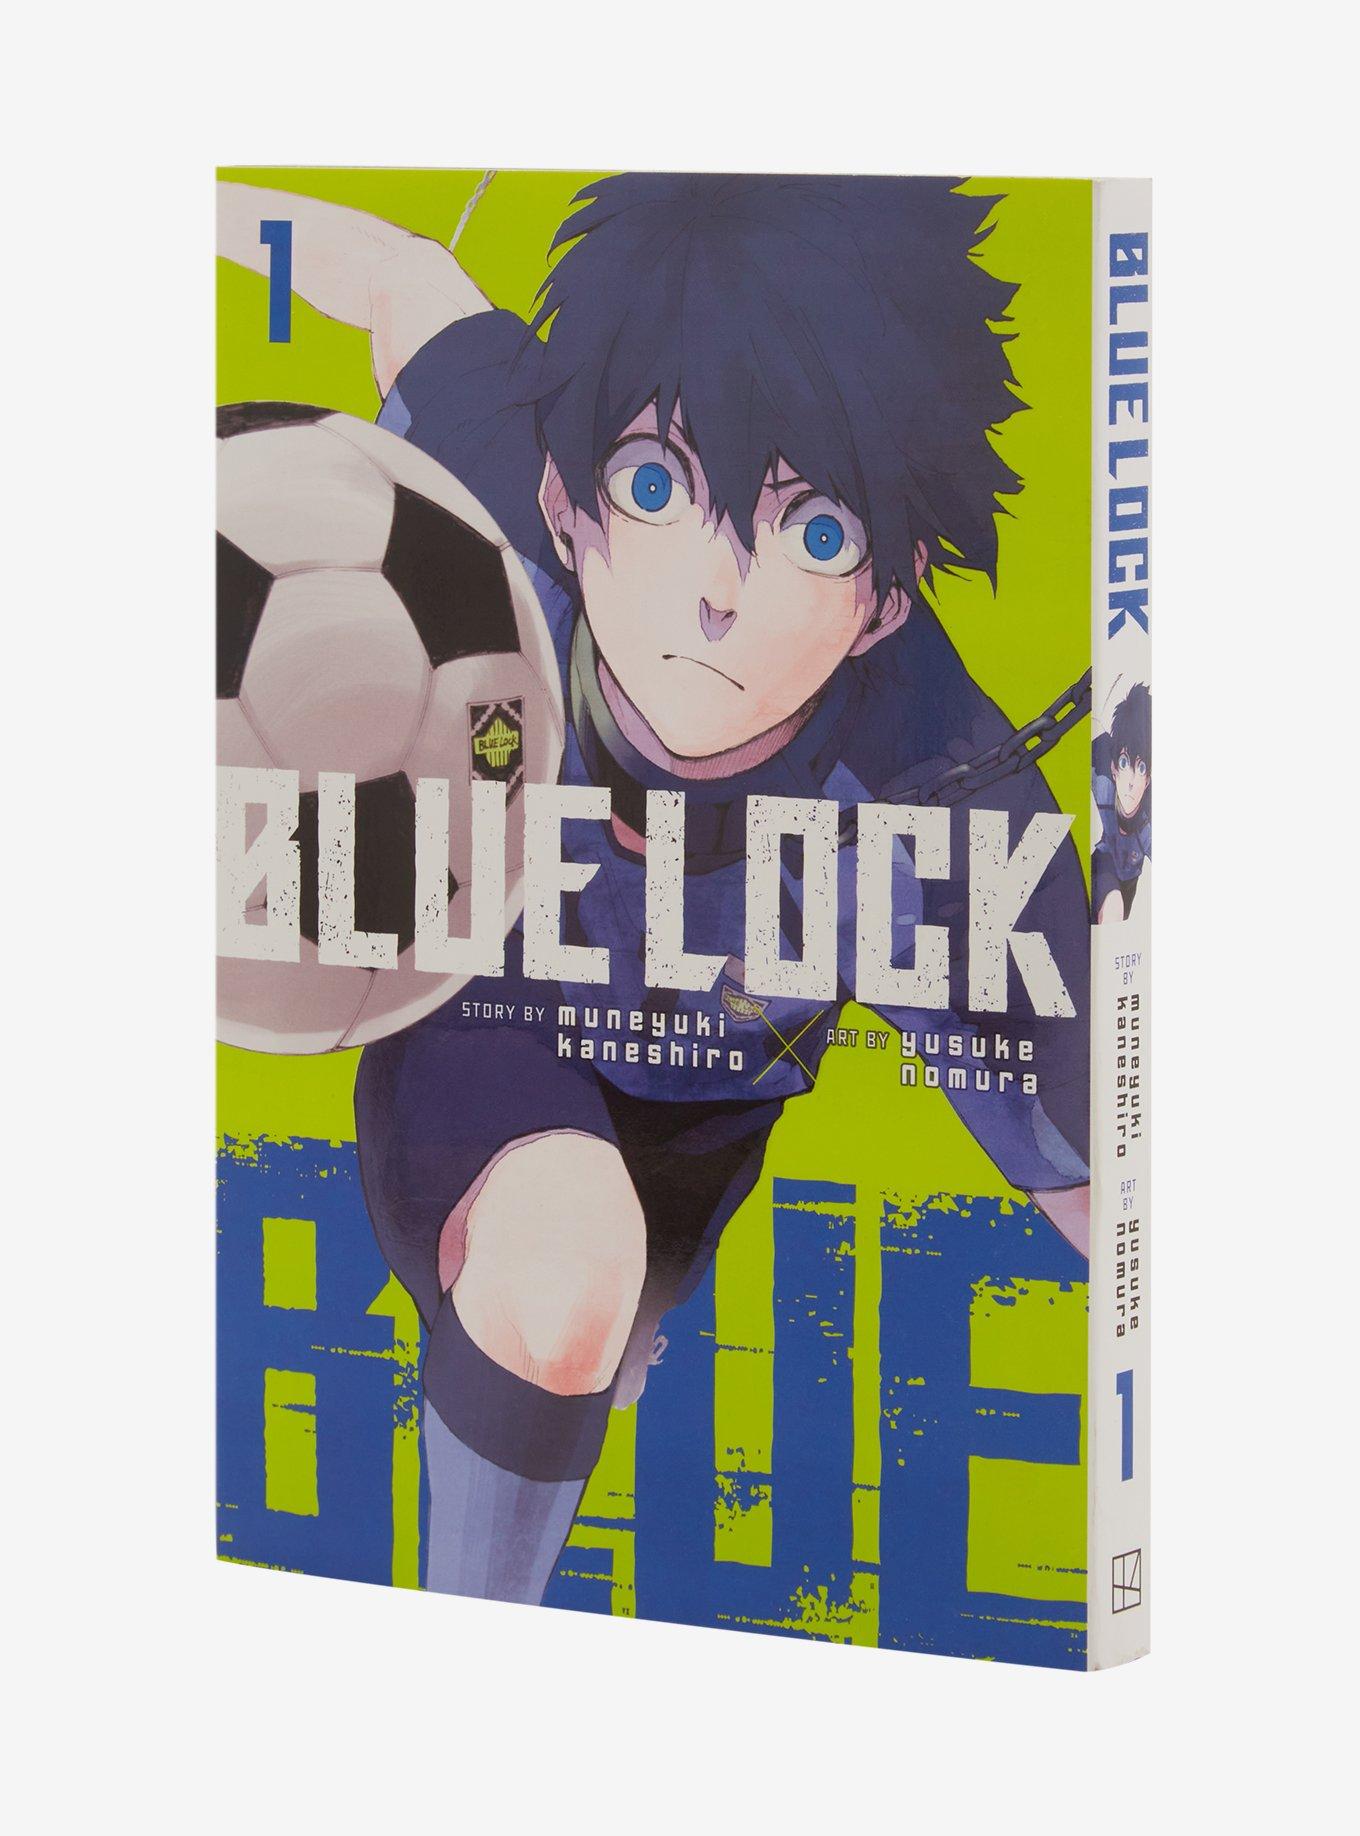 BLUELOCK Anime Gets 2nd Series, Film With 6 More Cast Members - News -  Anime News Network